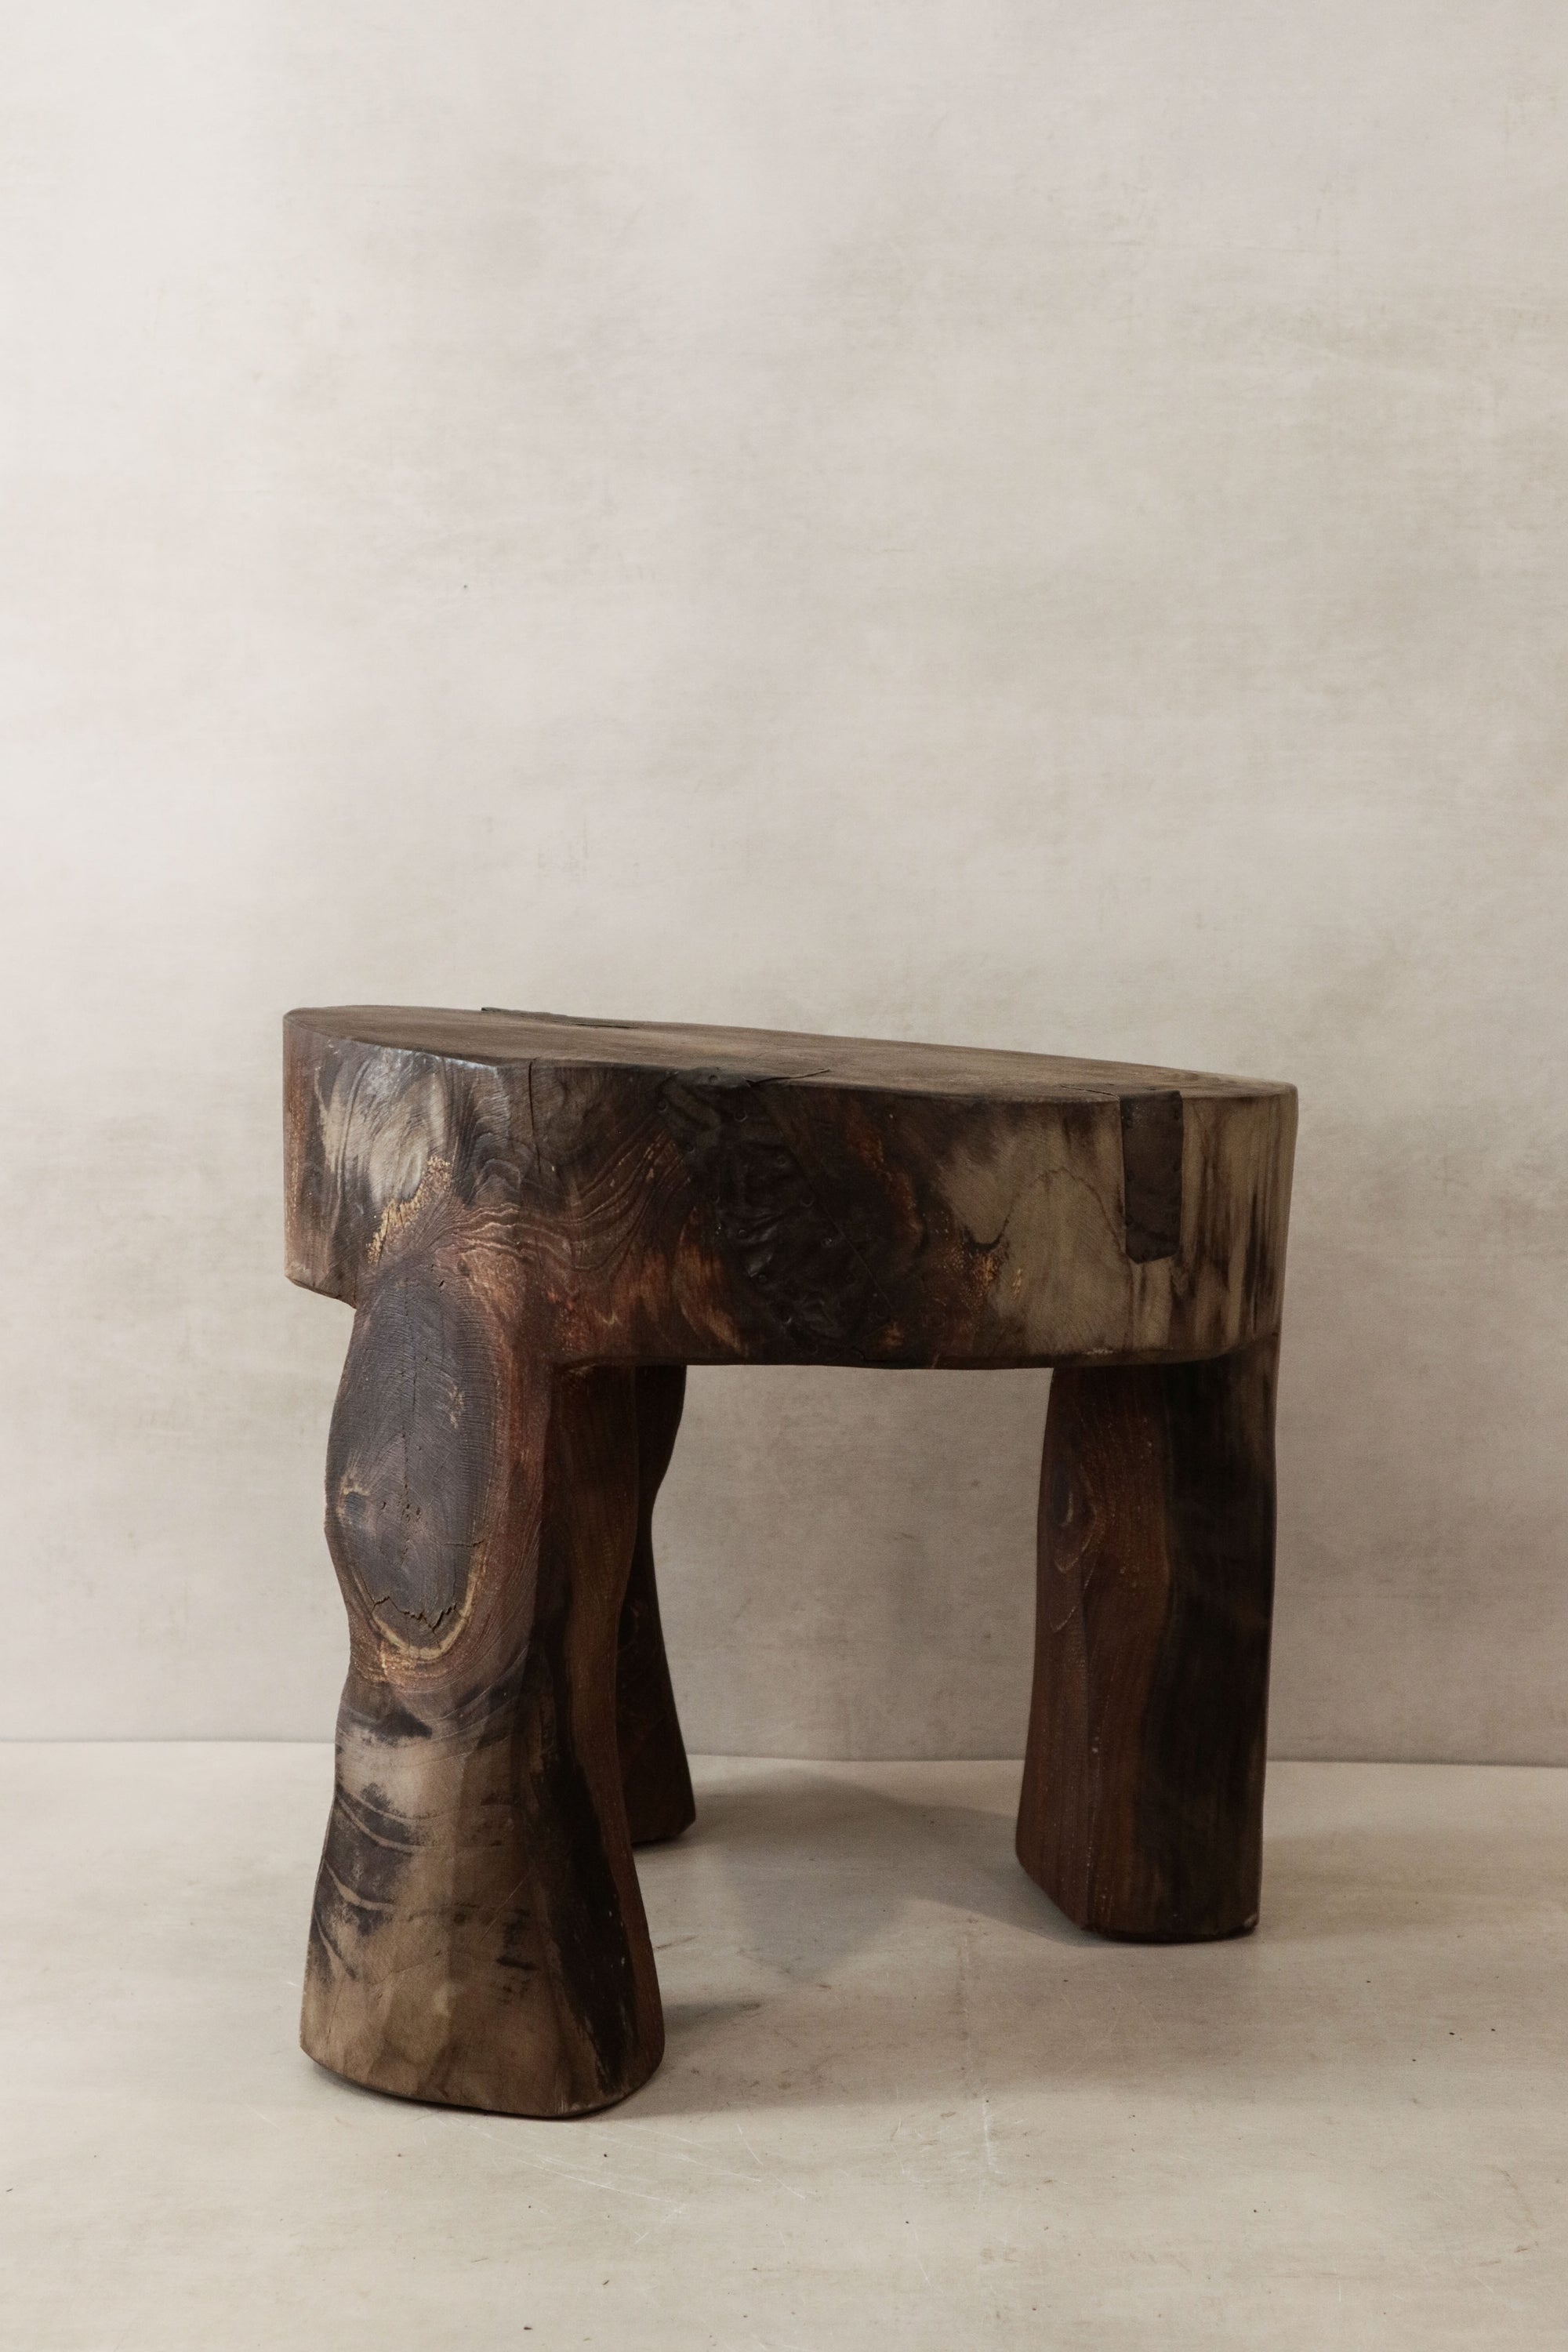 Hand Carved Wooden Stool\Side Table - 48.1